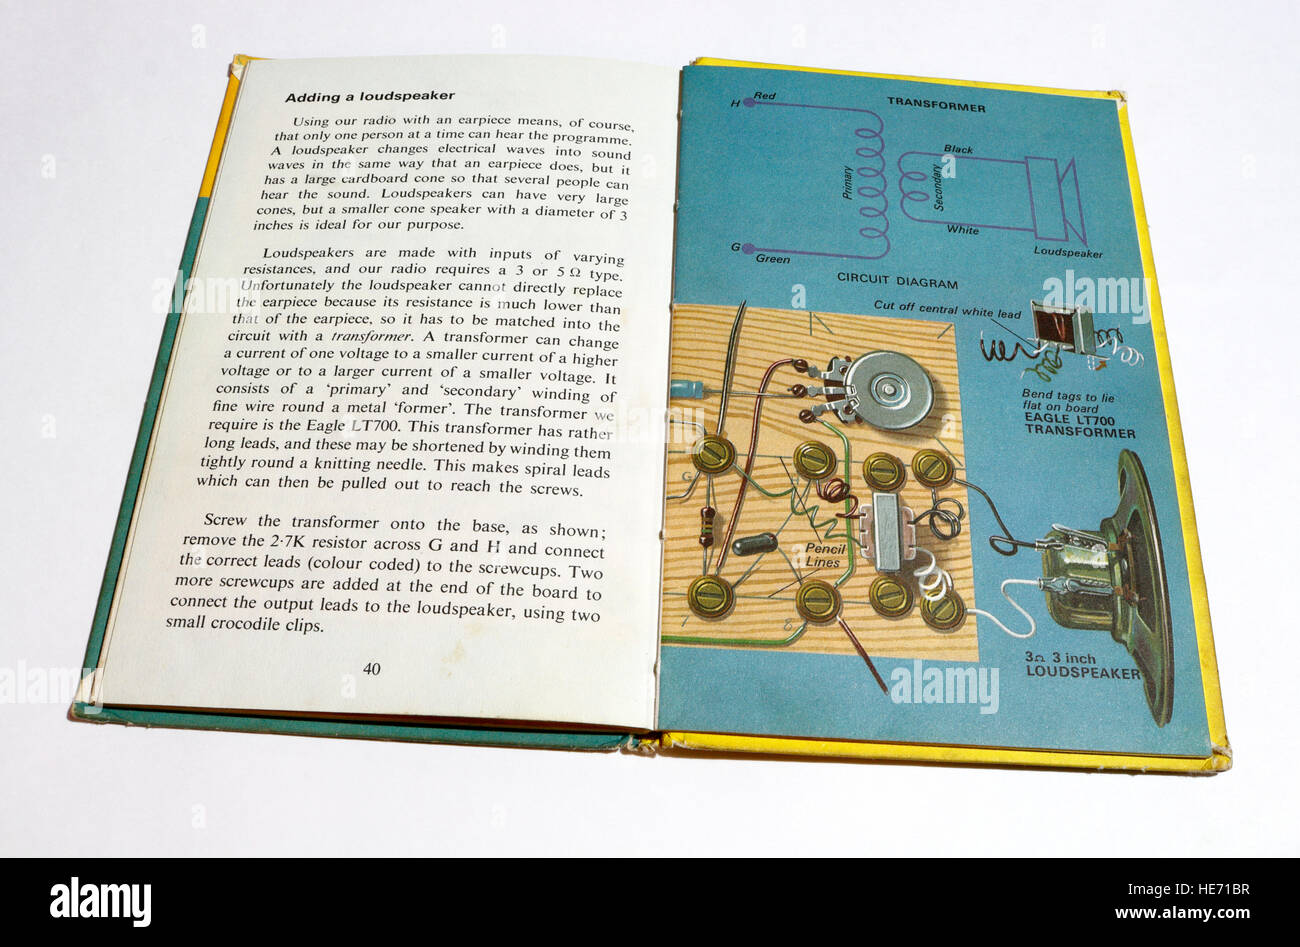 Pagina del libro Ladybird, Making a transistor radio, Educational Learning Educational Chilrens book Foto Stock